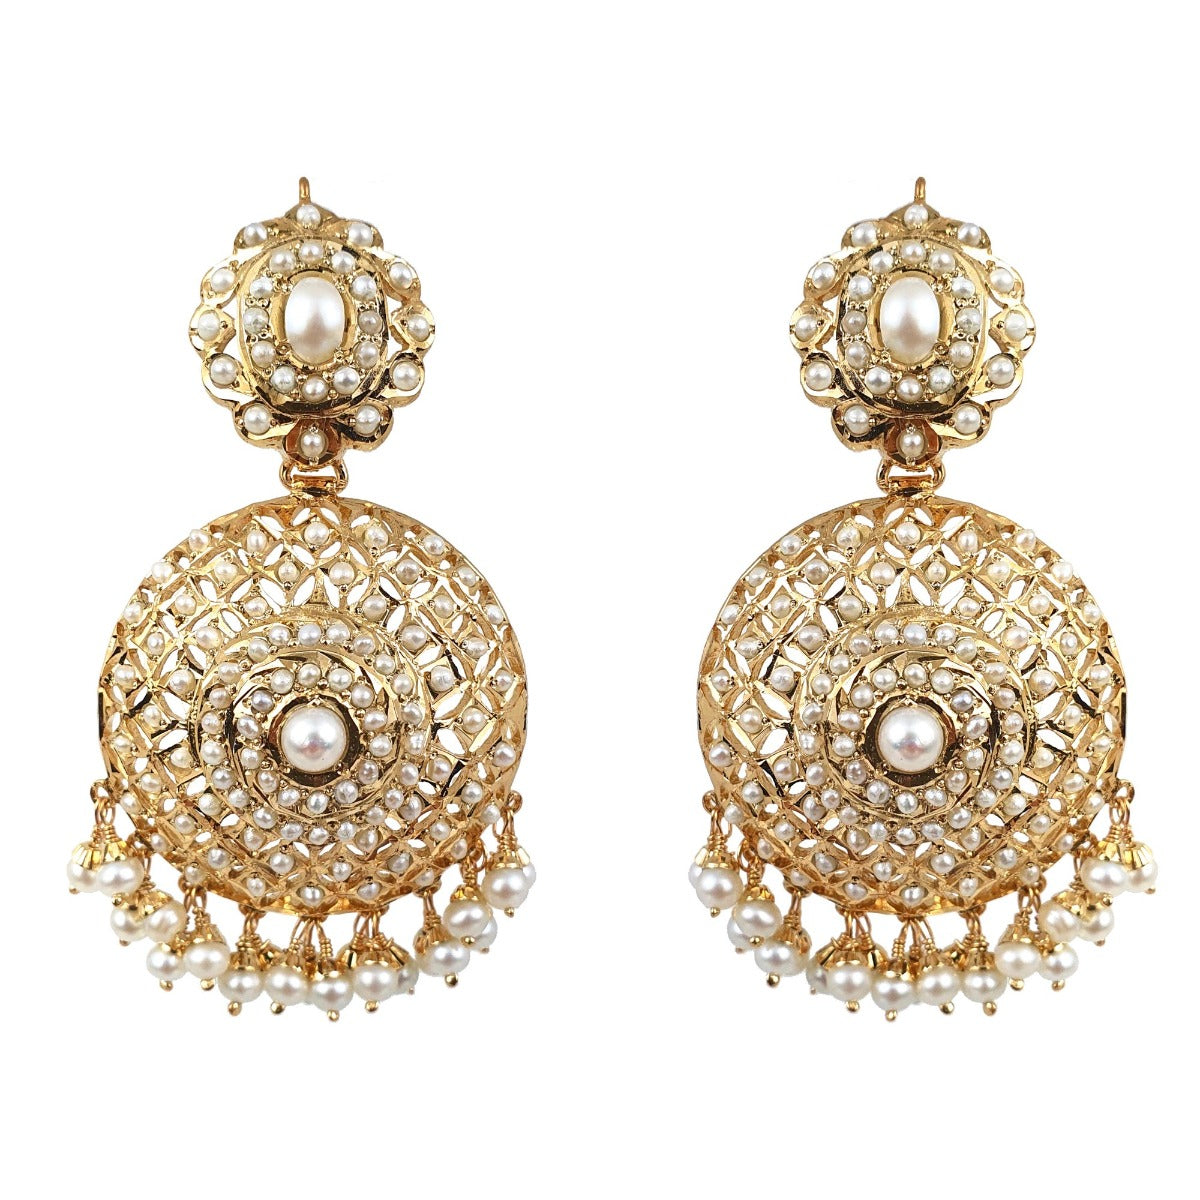 Authentic Pearl Earrings | Large Round Earrings on Gold Plated Silver ER 025